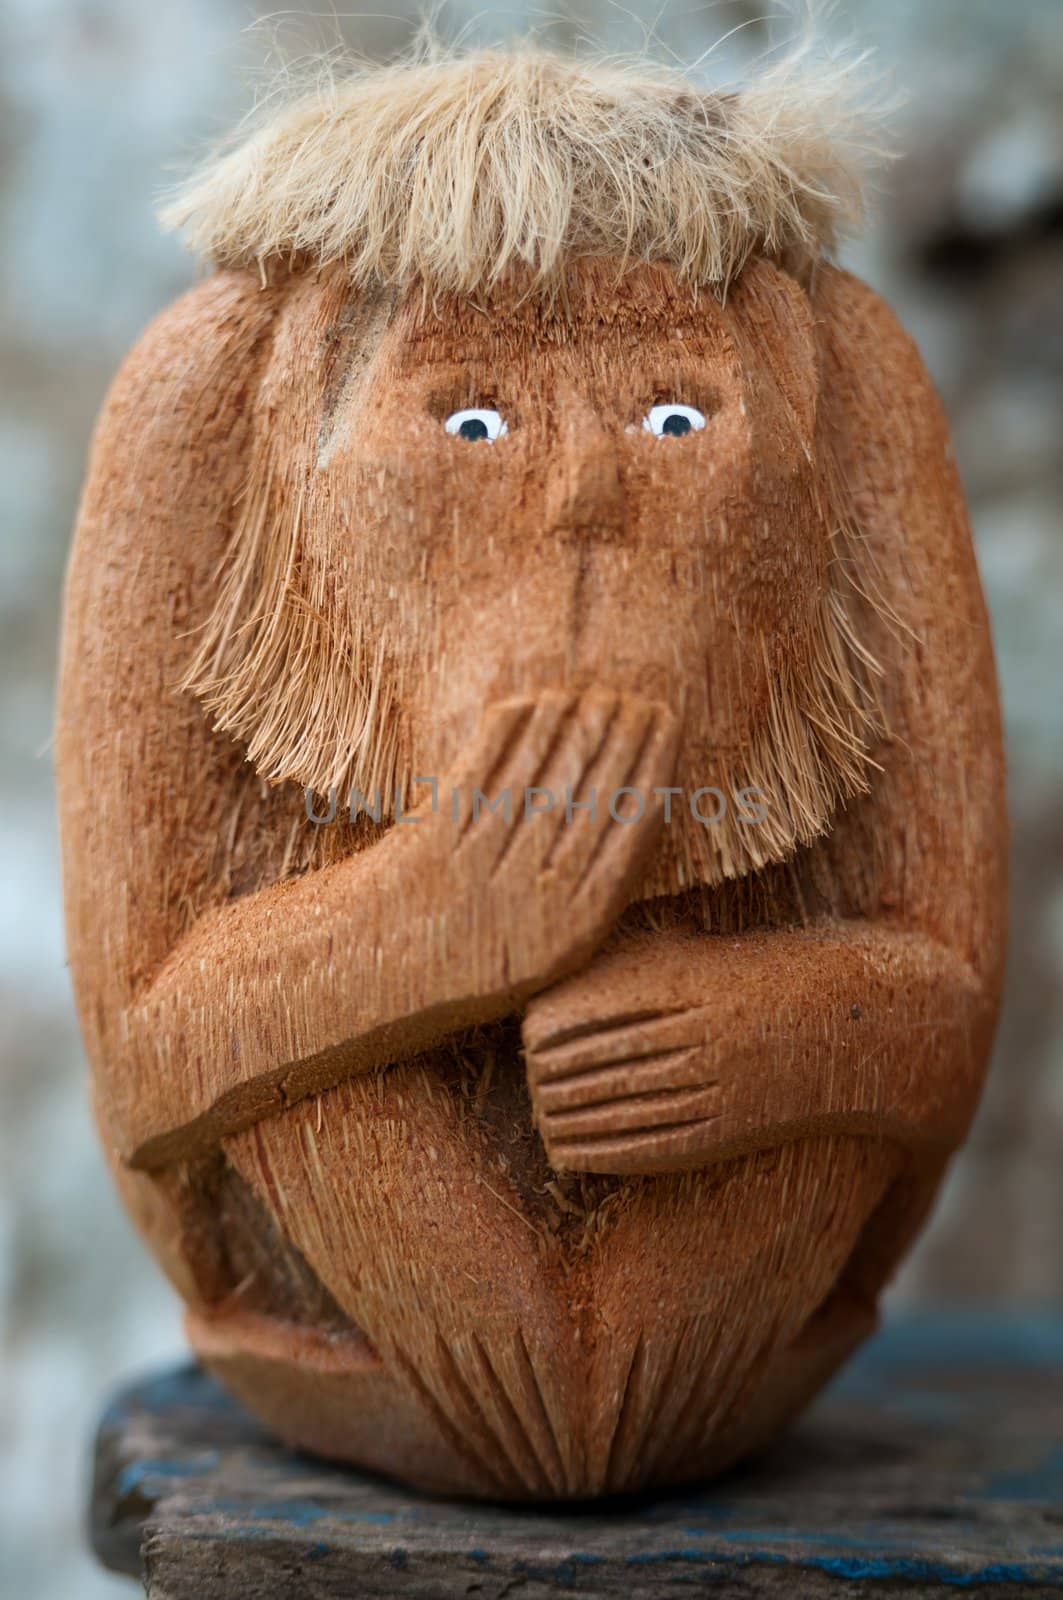 Handmade wooden coconut monkey with unspoken gesture. Selective focus on eyes.